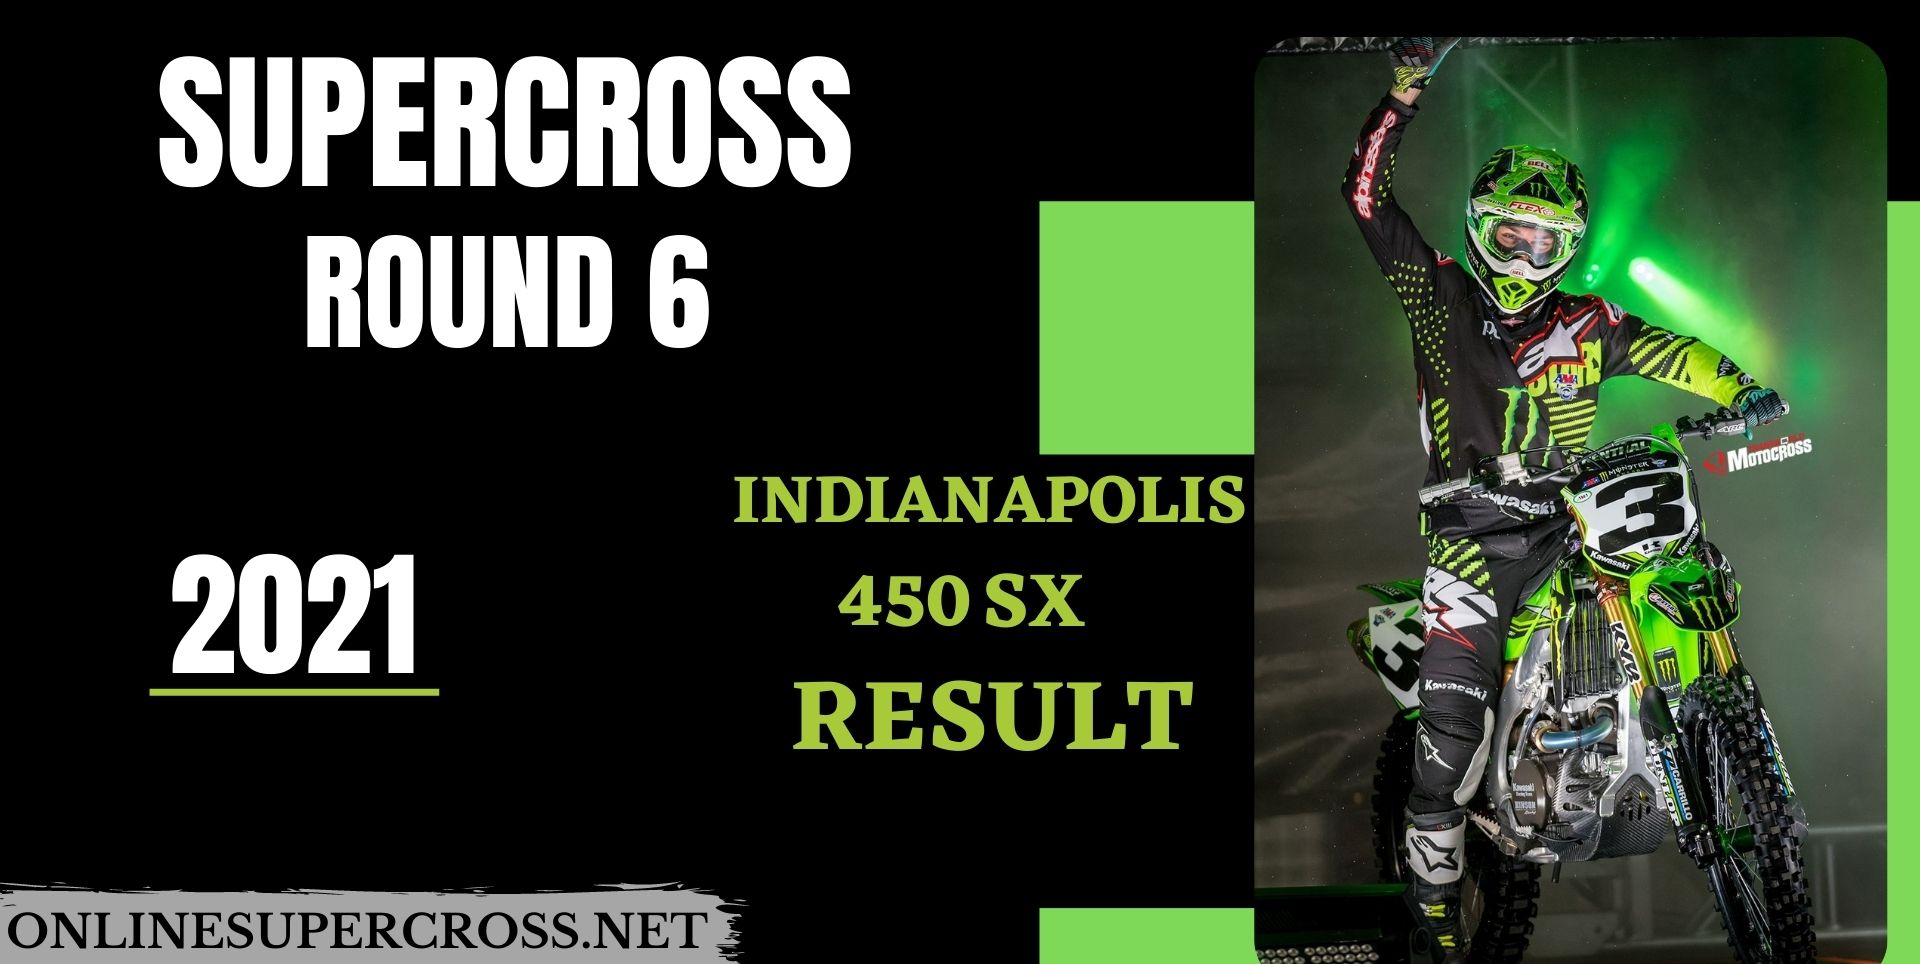 Indianapolis Round 6 Supercross 450SX Result 2021